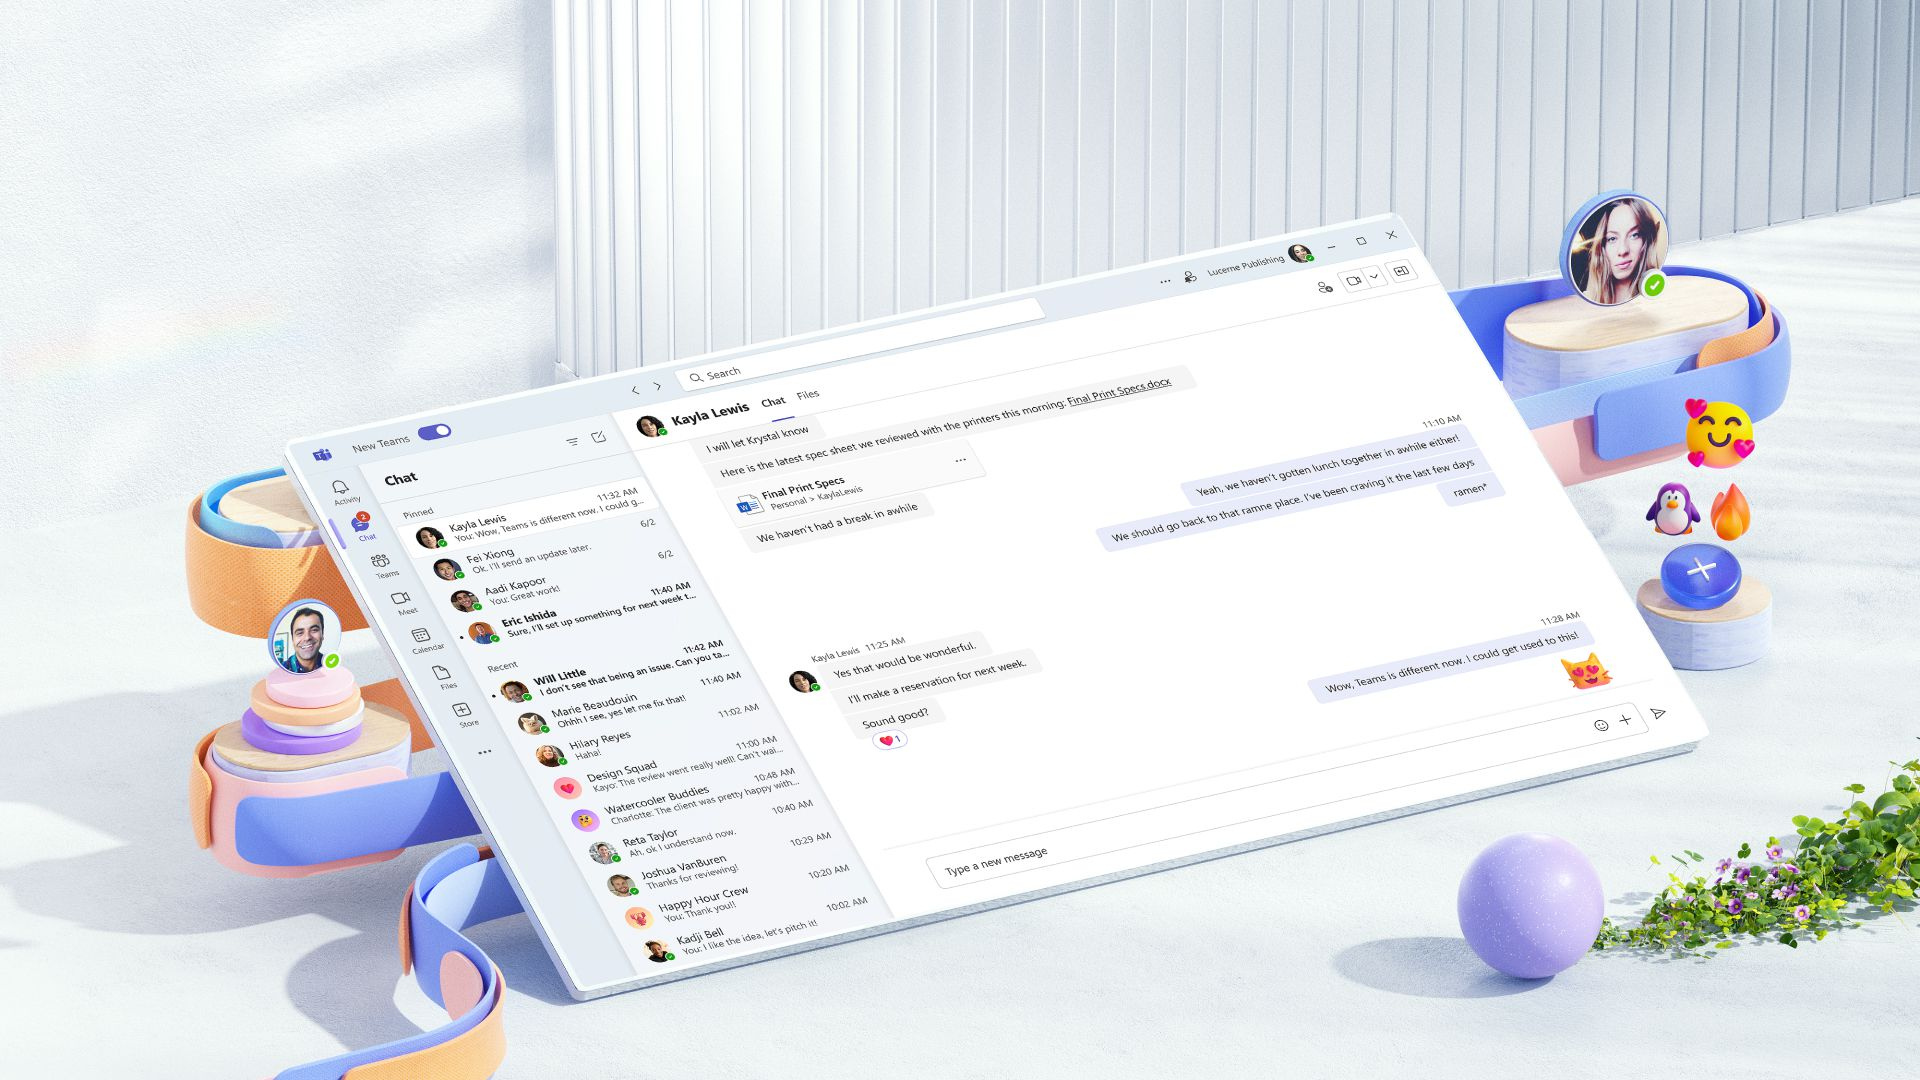 Windows 11-inspired Microsoft Teams desktop app is now available